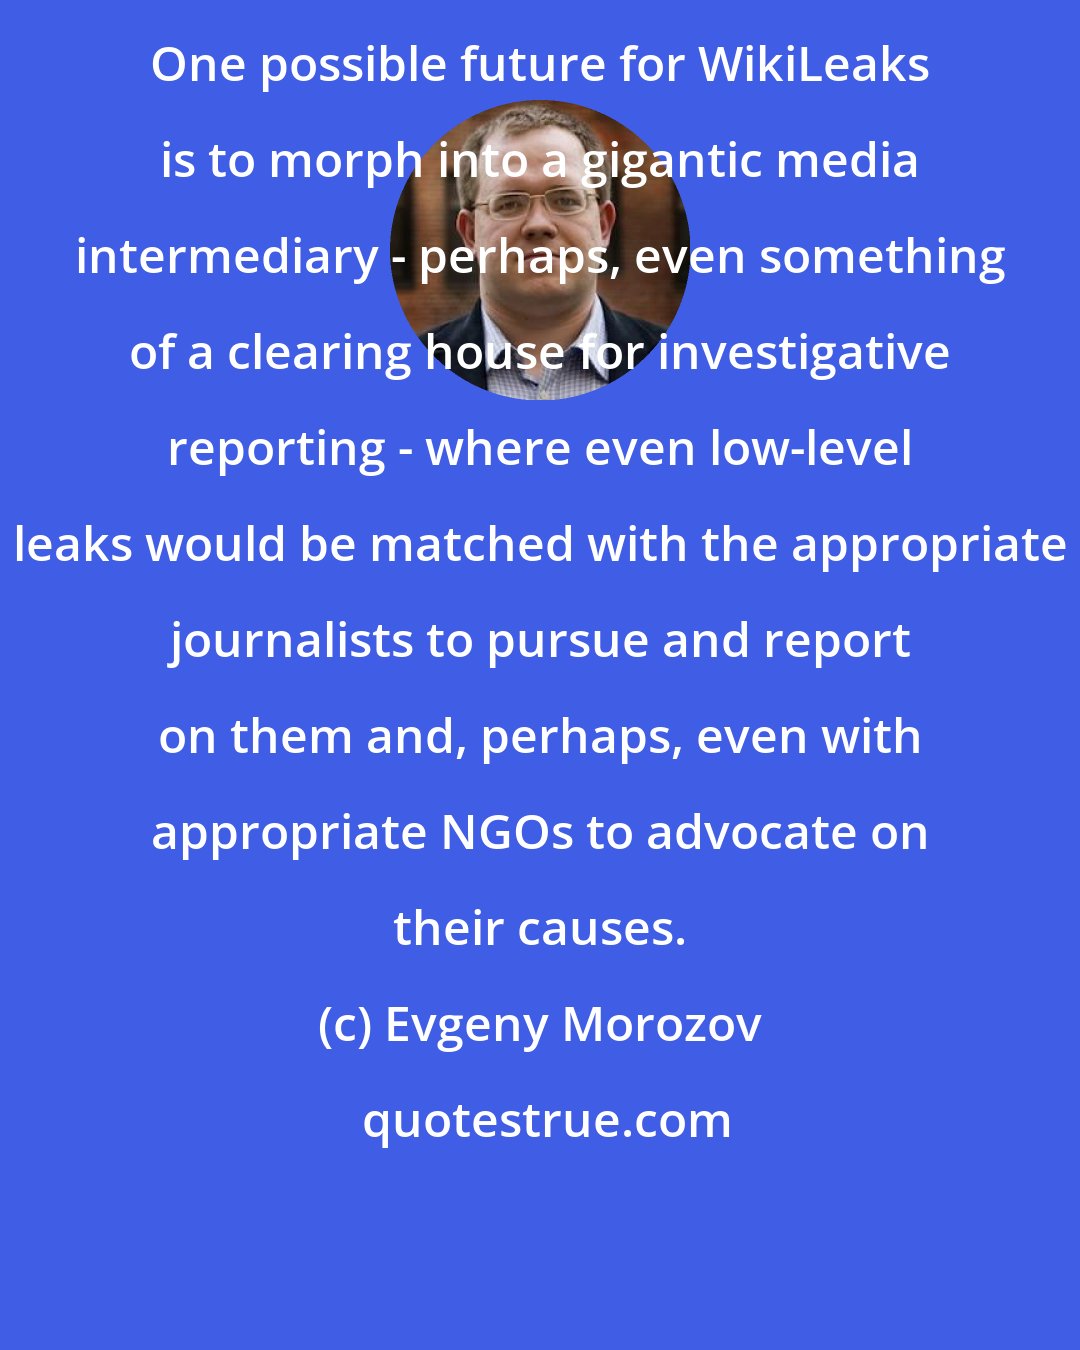 Evgeny Morozov: One possible future for WikiLeaks is to morph into a gigantic media intermediary - perhaps, even something of a clearing house for investigative reporting - where even low-level leaks would be matched with the appropriate journalists to pursue and report on them and, perhaps, even with appropriate NGOs to advocate on their causes.